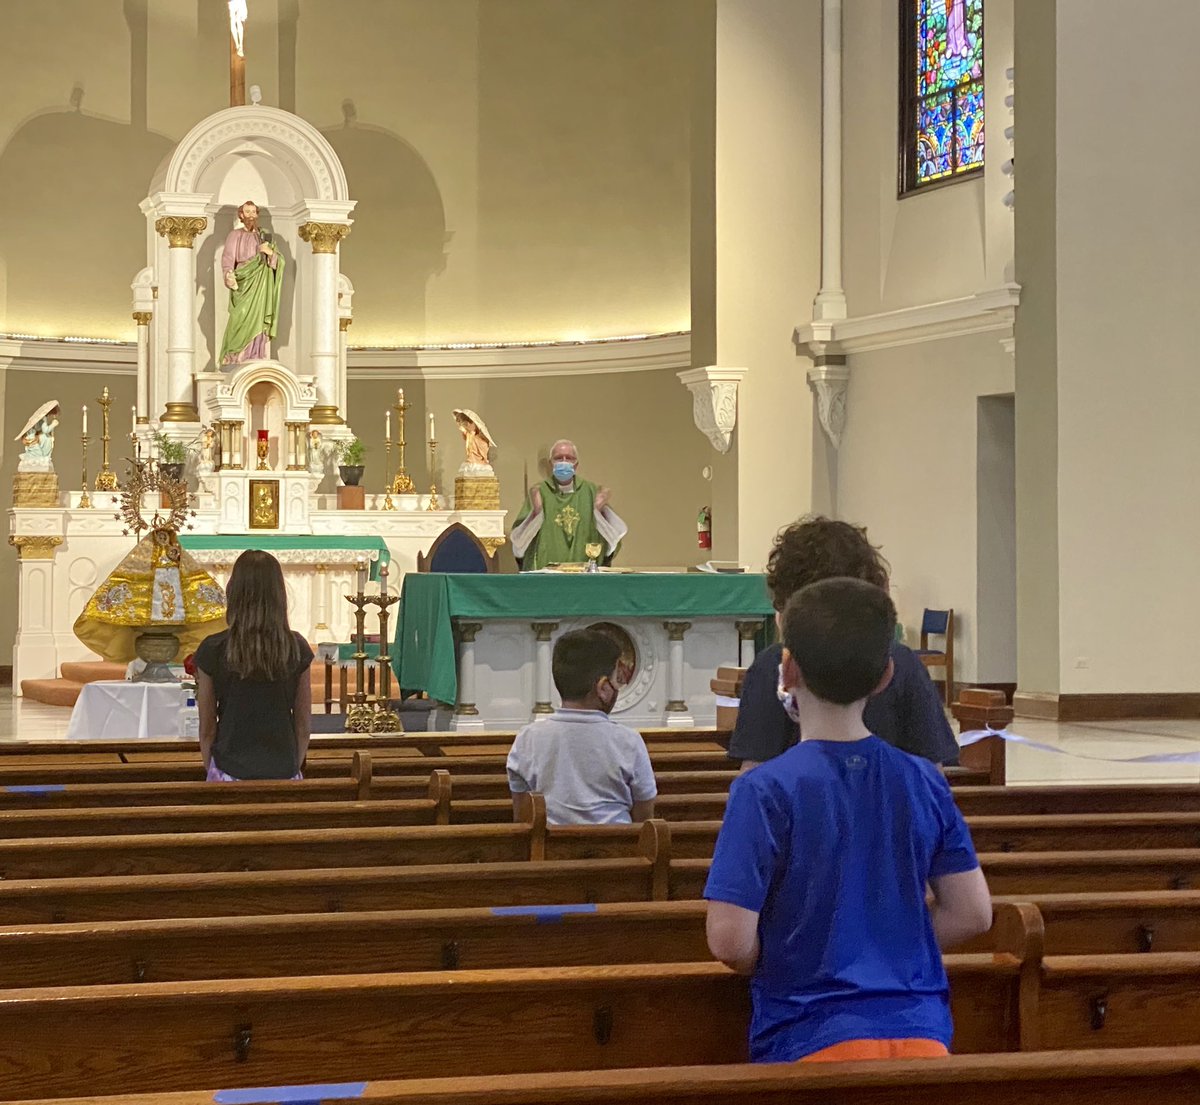 Today @SchoolMatthias 5th graders went to Mass. Rather than having an All-School Mass, classrooms will have the opportunity to attend Mass and pray with their classmates. 🙏🏻💒#archdioceseofchicago #bigshouldersfund